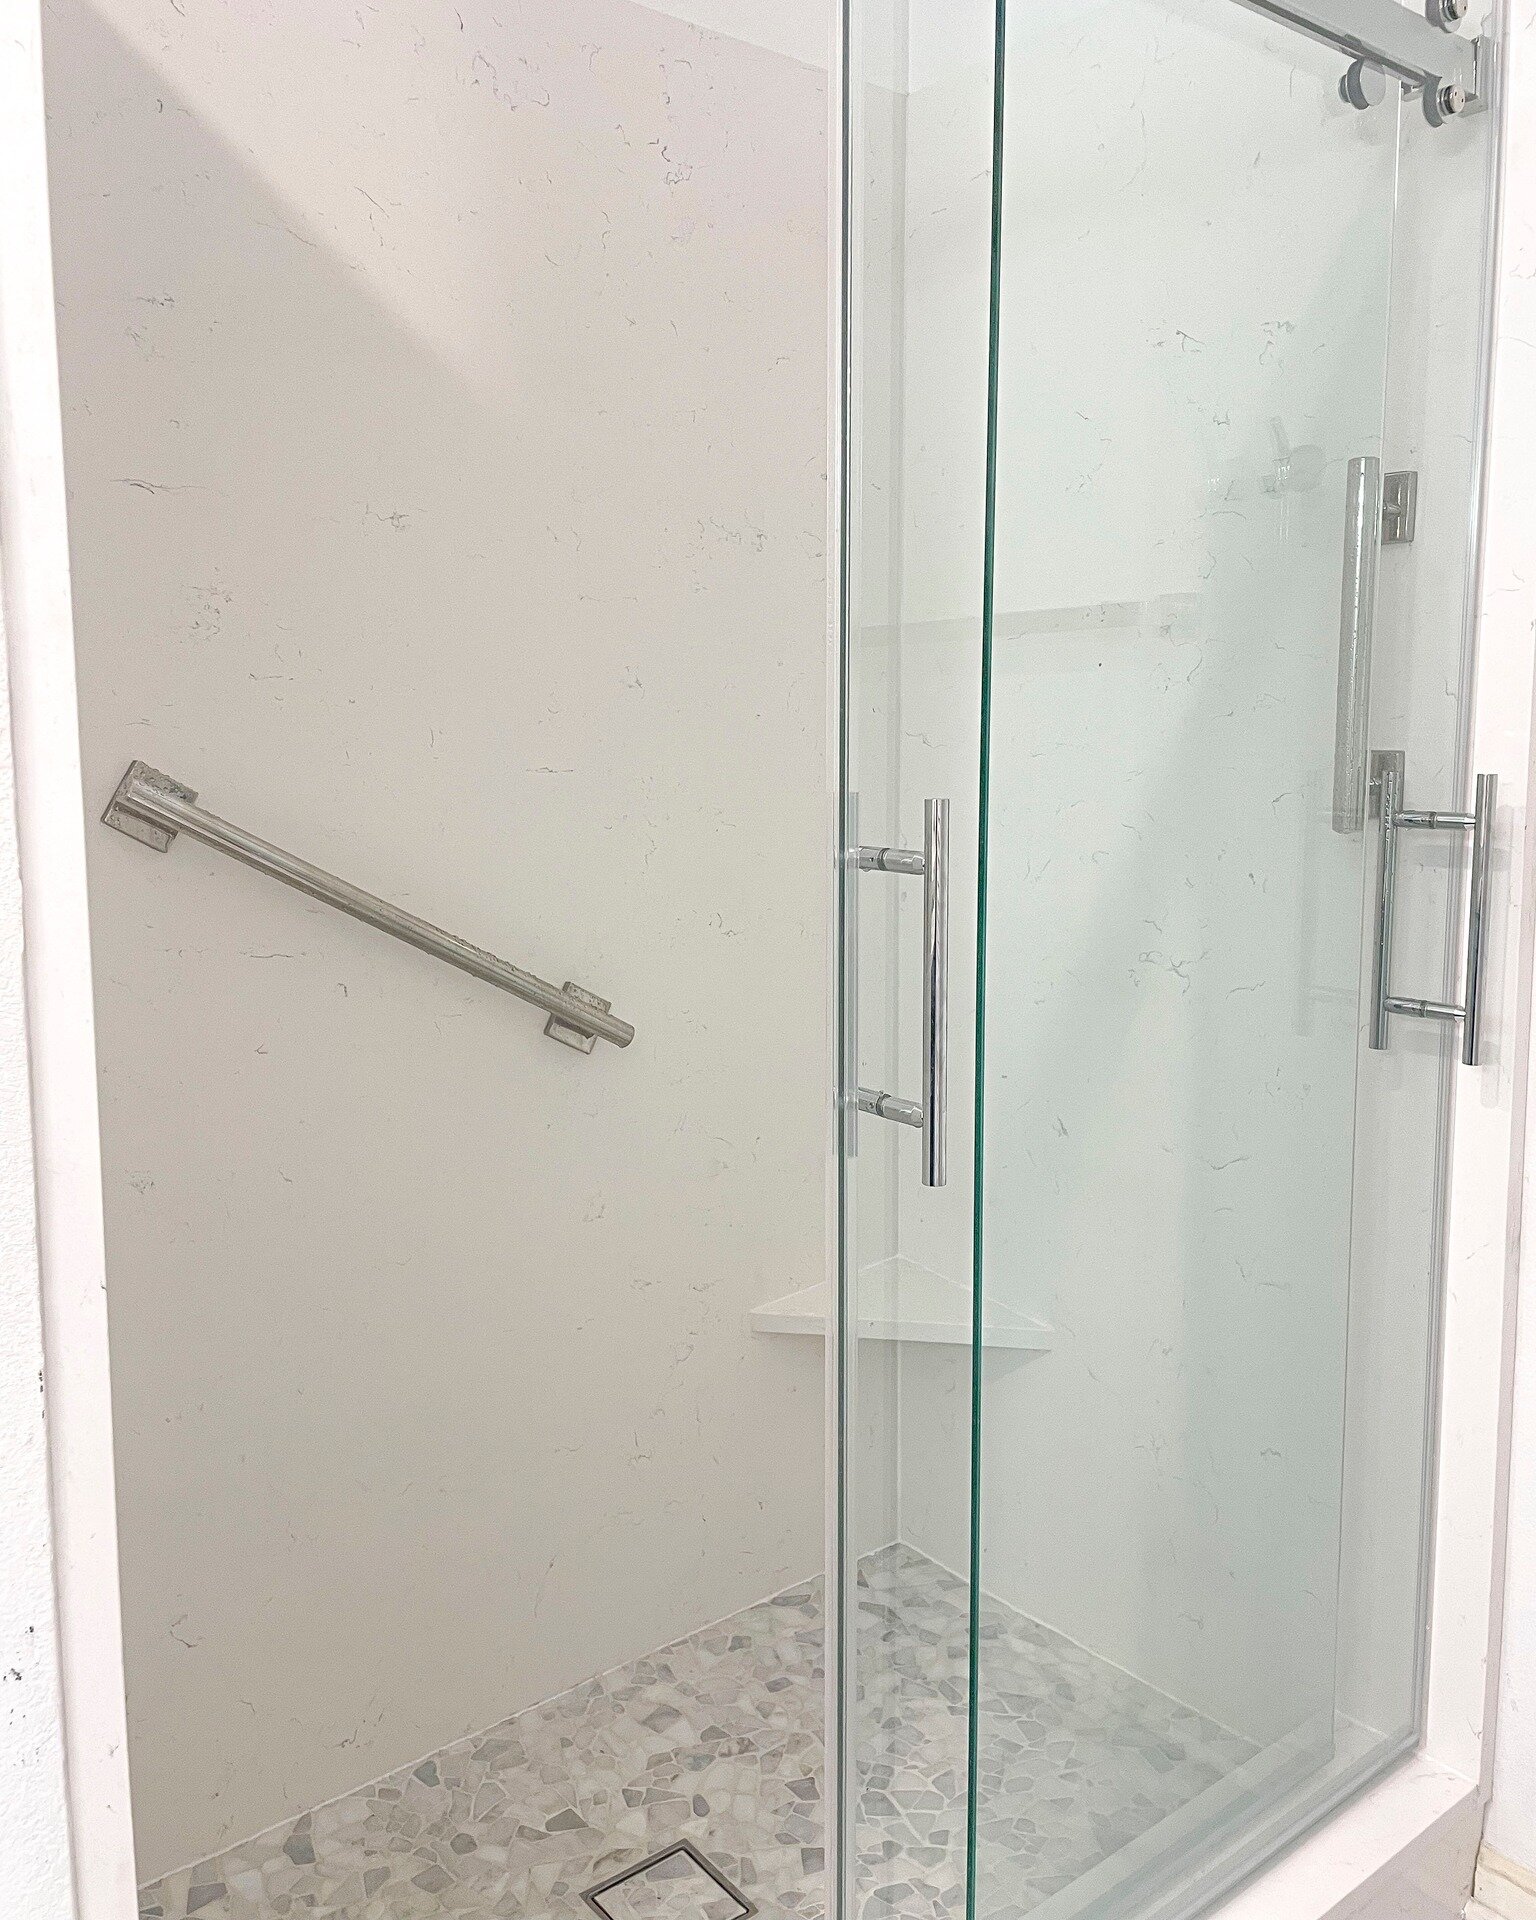 Our latest Georgetown bathroom remodel🤍
-
-
Bianco Fumo shower walls and tiled zero-threshold flooring to complete our happy customers dream project!
Want something similar? Go to www.grtxremodeling.com to schedule
#grtxremodeling #ATXinteriordesign